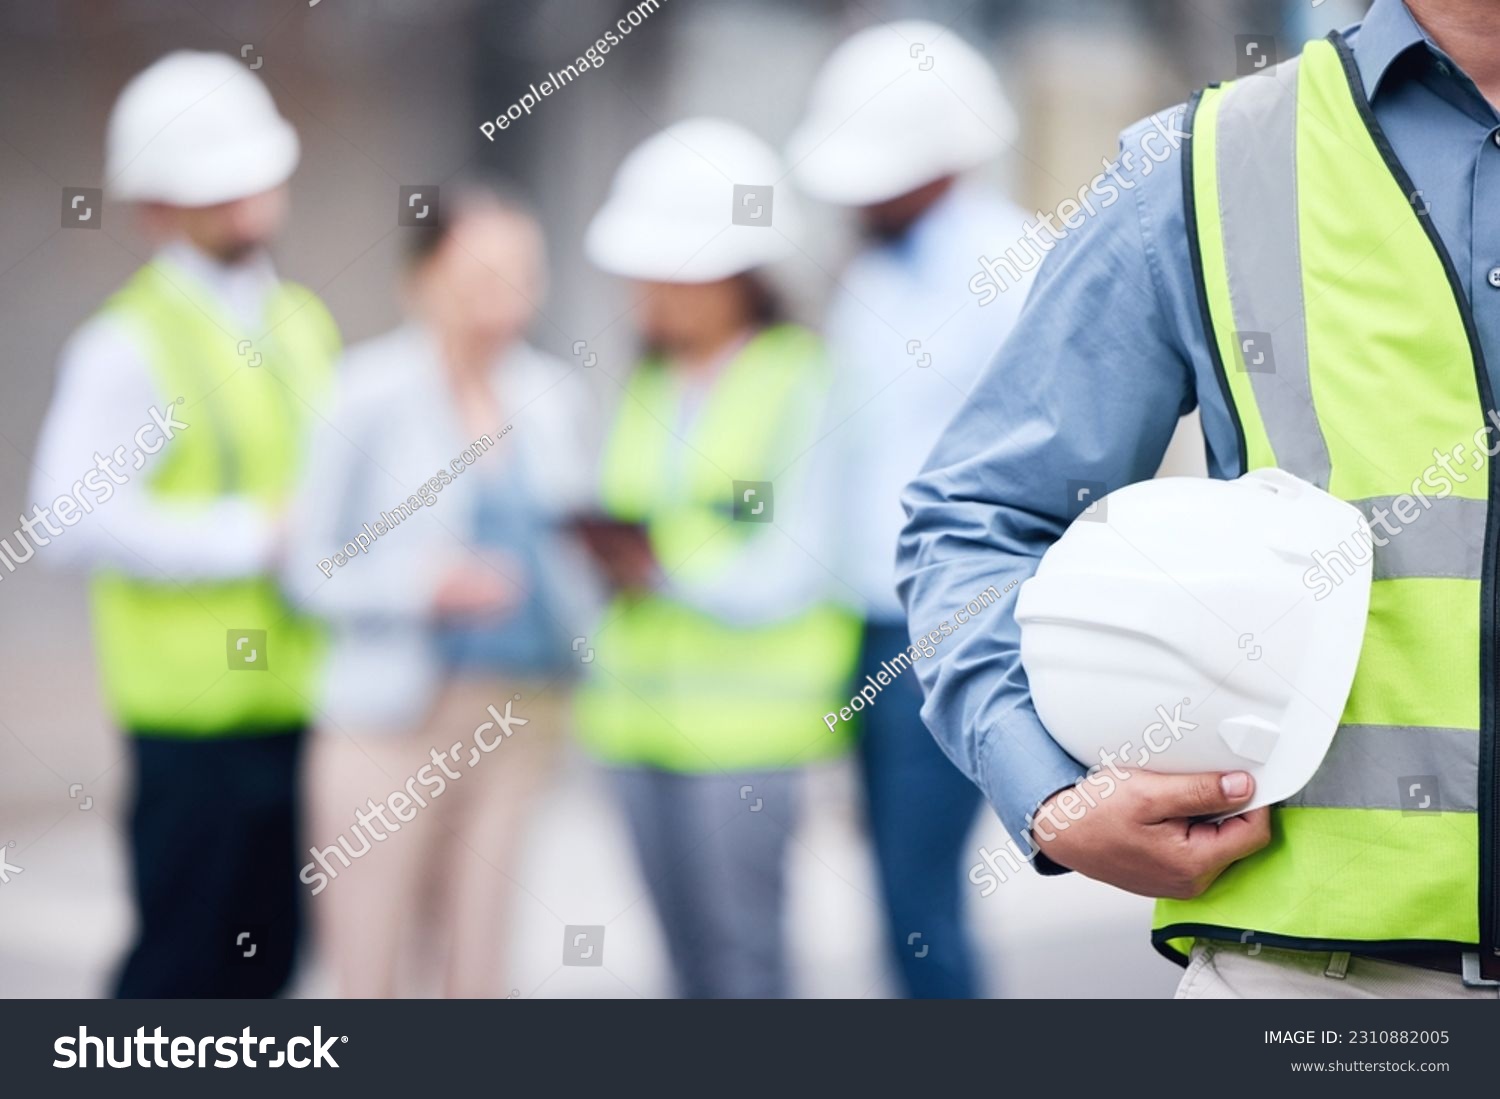 Businessman, architect and helmet for safety in construction, project management or meeting on site. Man holding hard hat for industrial architecture, teamwork or maintenance and building in the city #2310882005